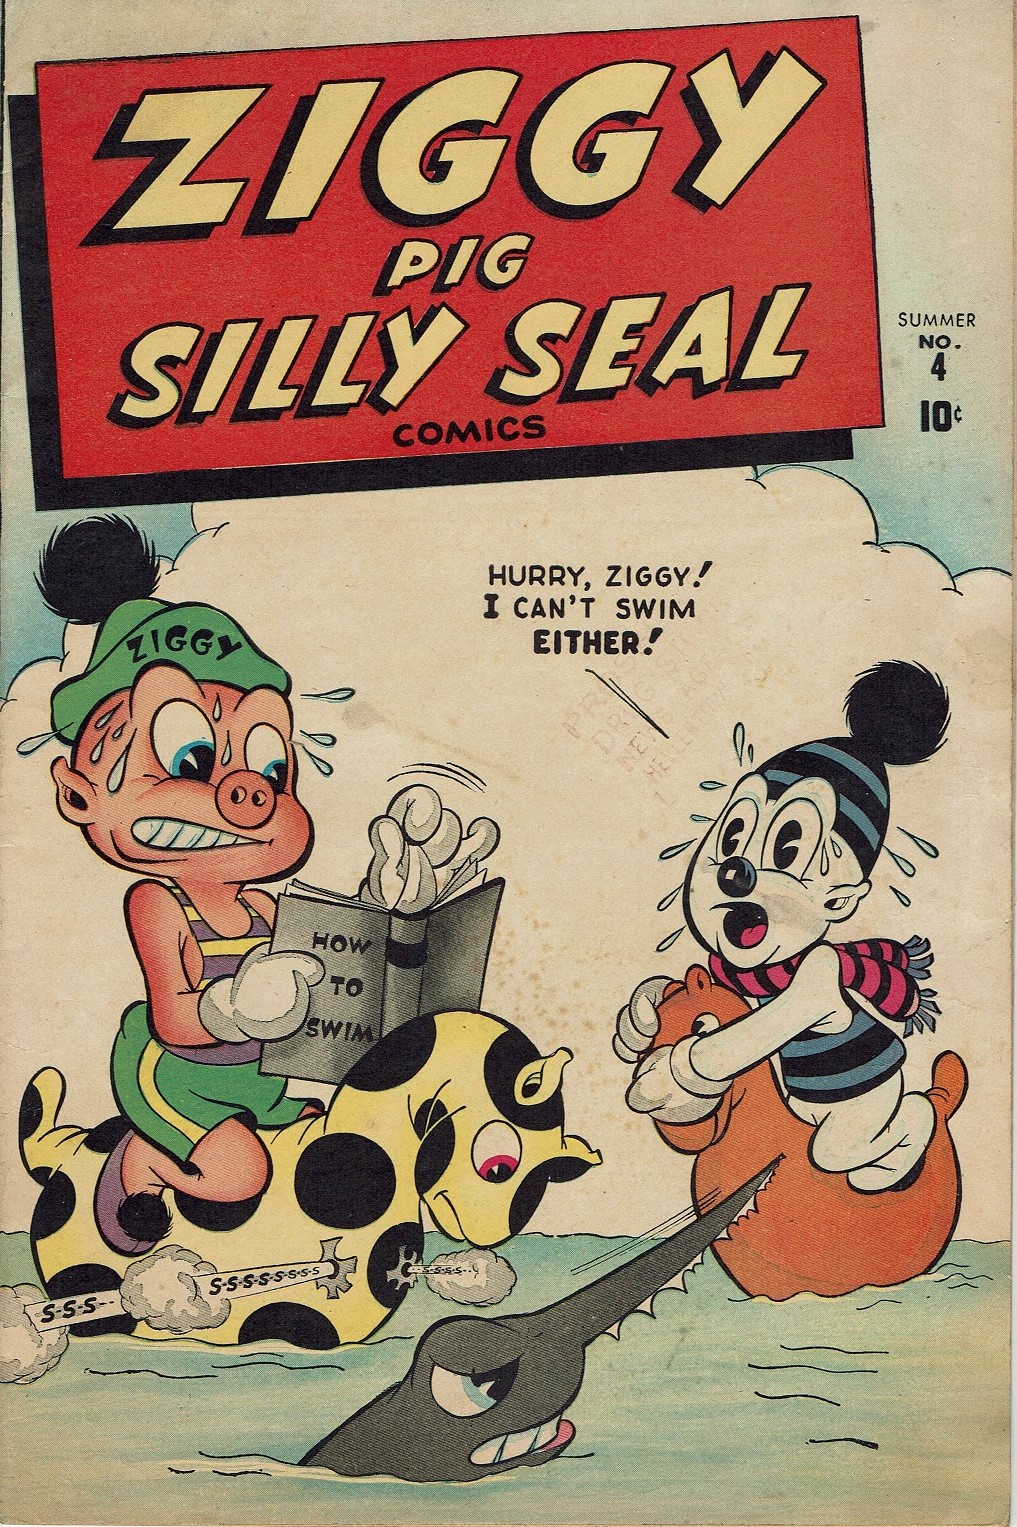 Ziggy Pig-Silly Seal Comics (1944) 4 Page 1